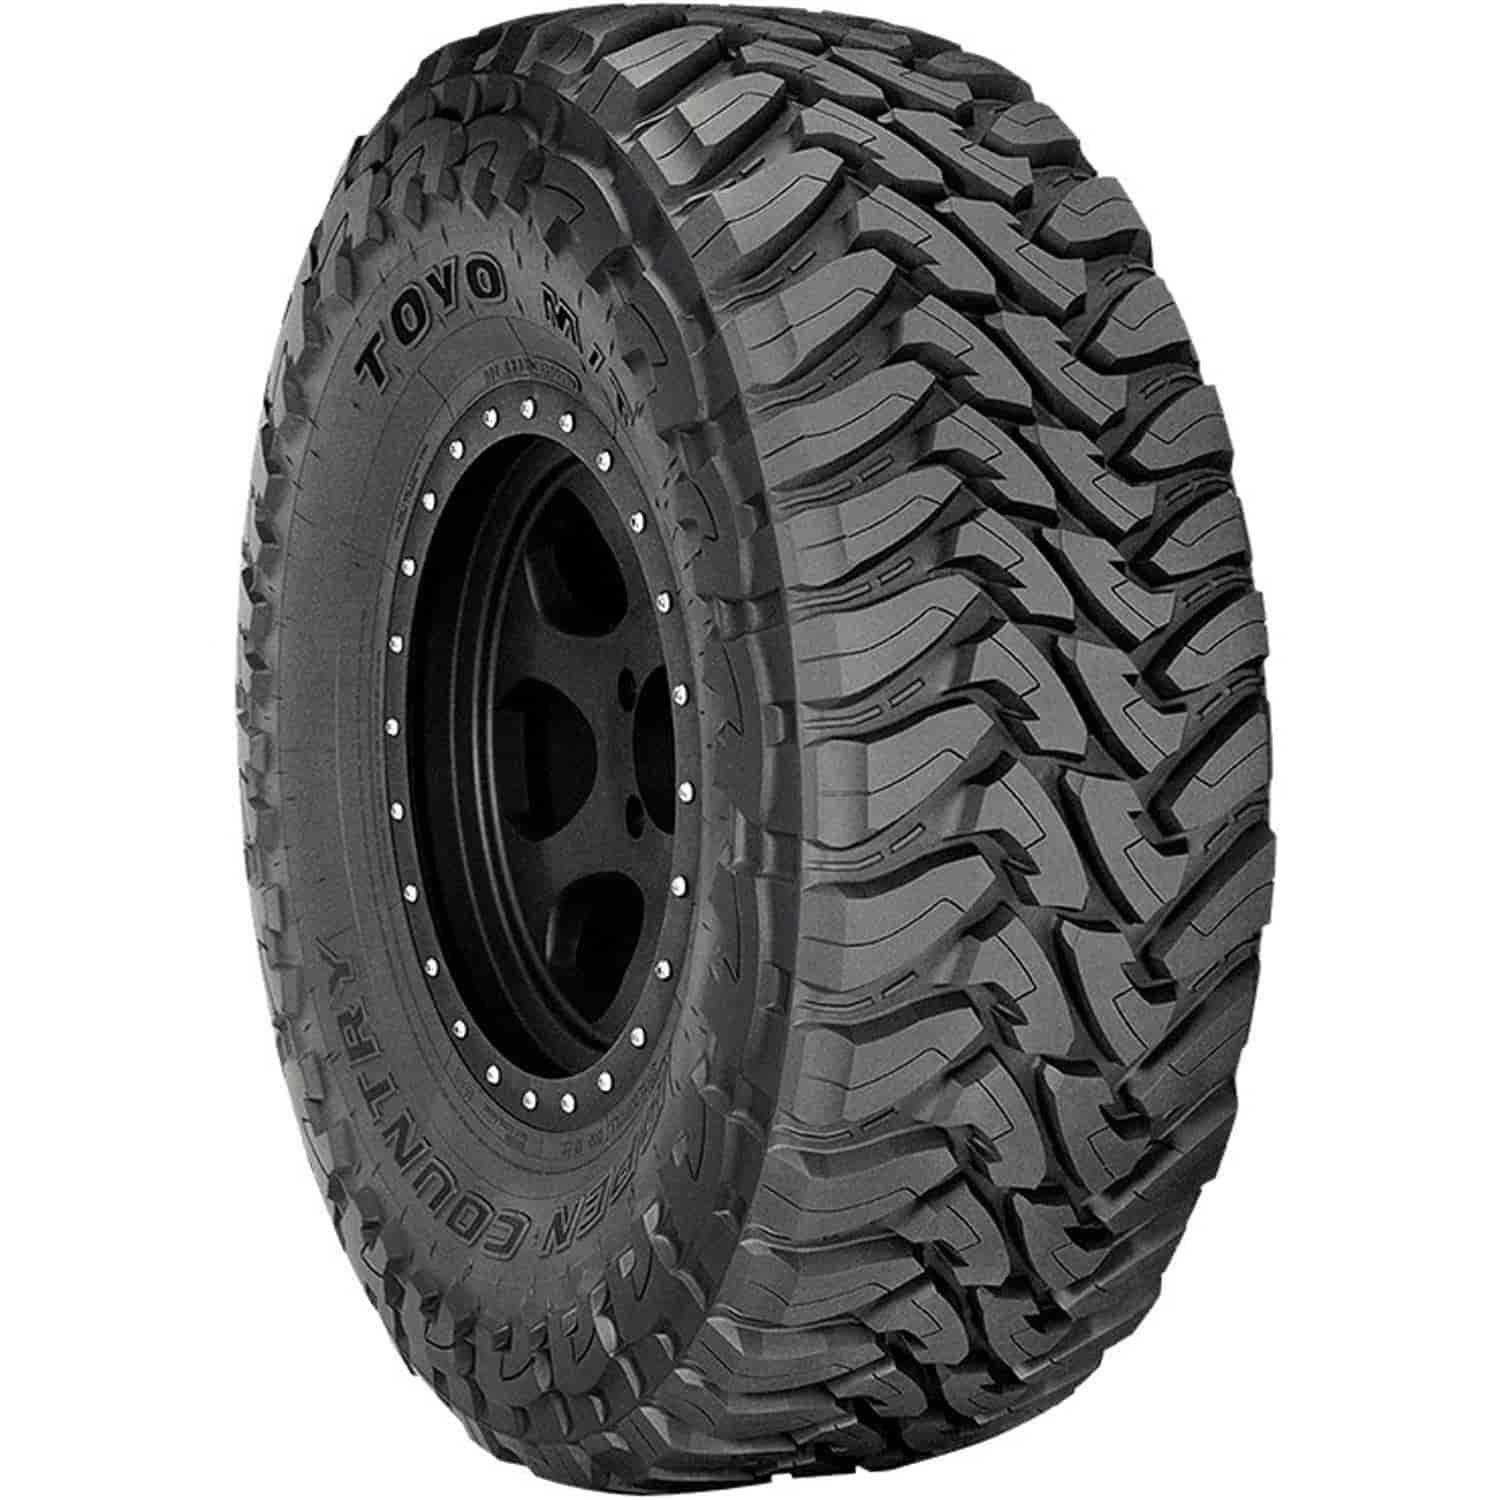 Open Country M/T LT295/70R17 128P E/10 33X11.50R17